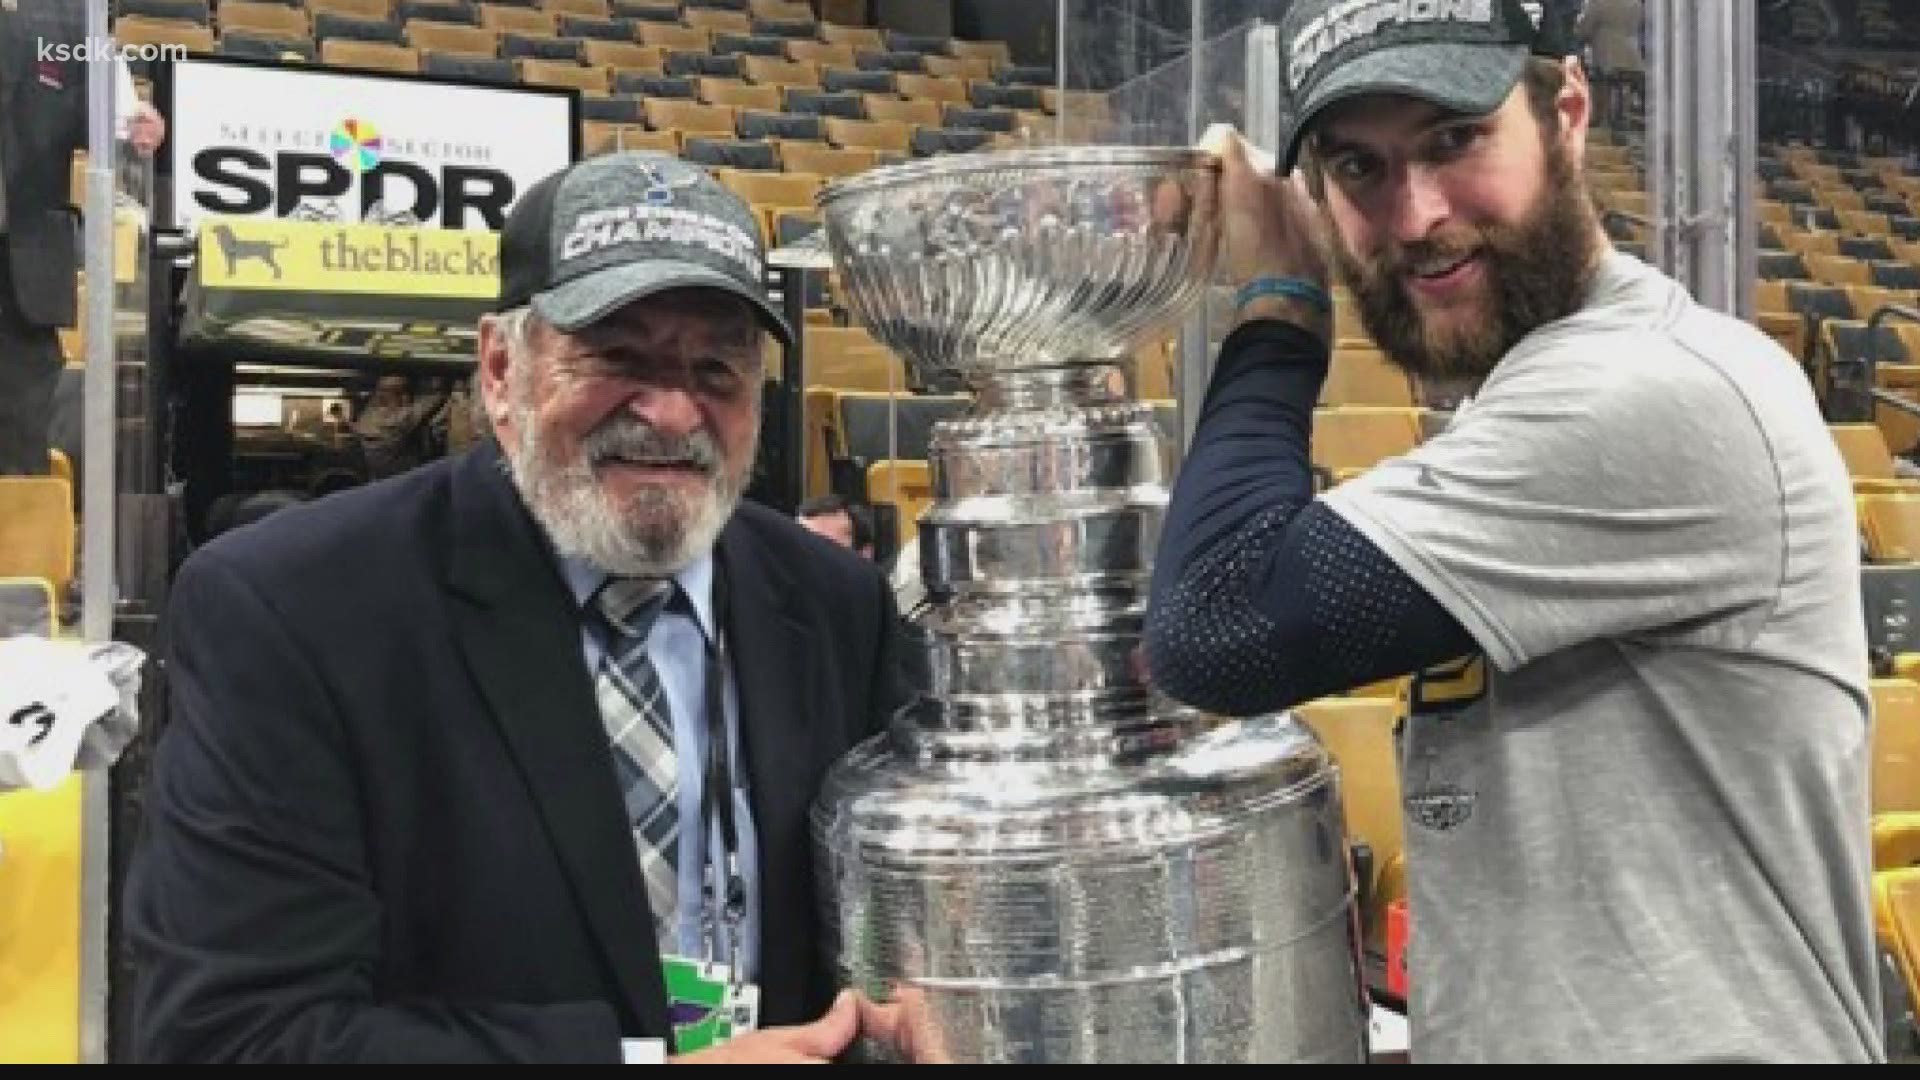 Plager was with the Blues for the entirety of their existence, and finally got his Stanley Cup in 2019